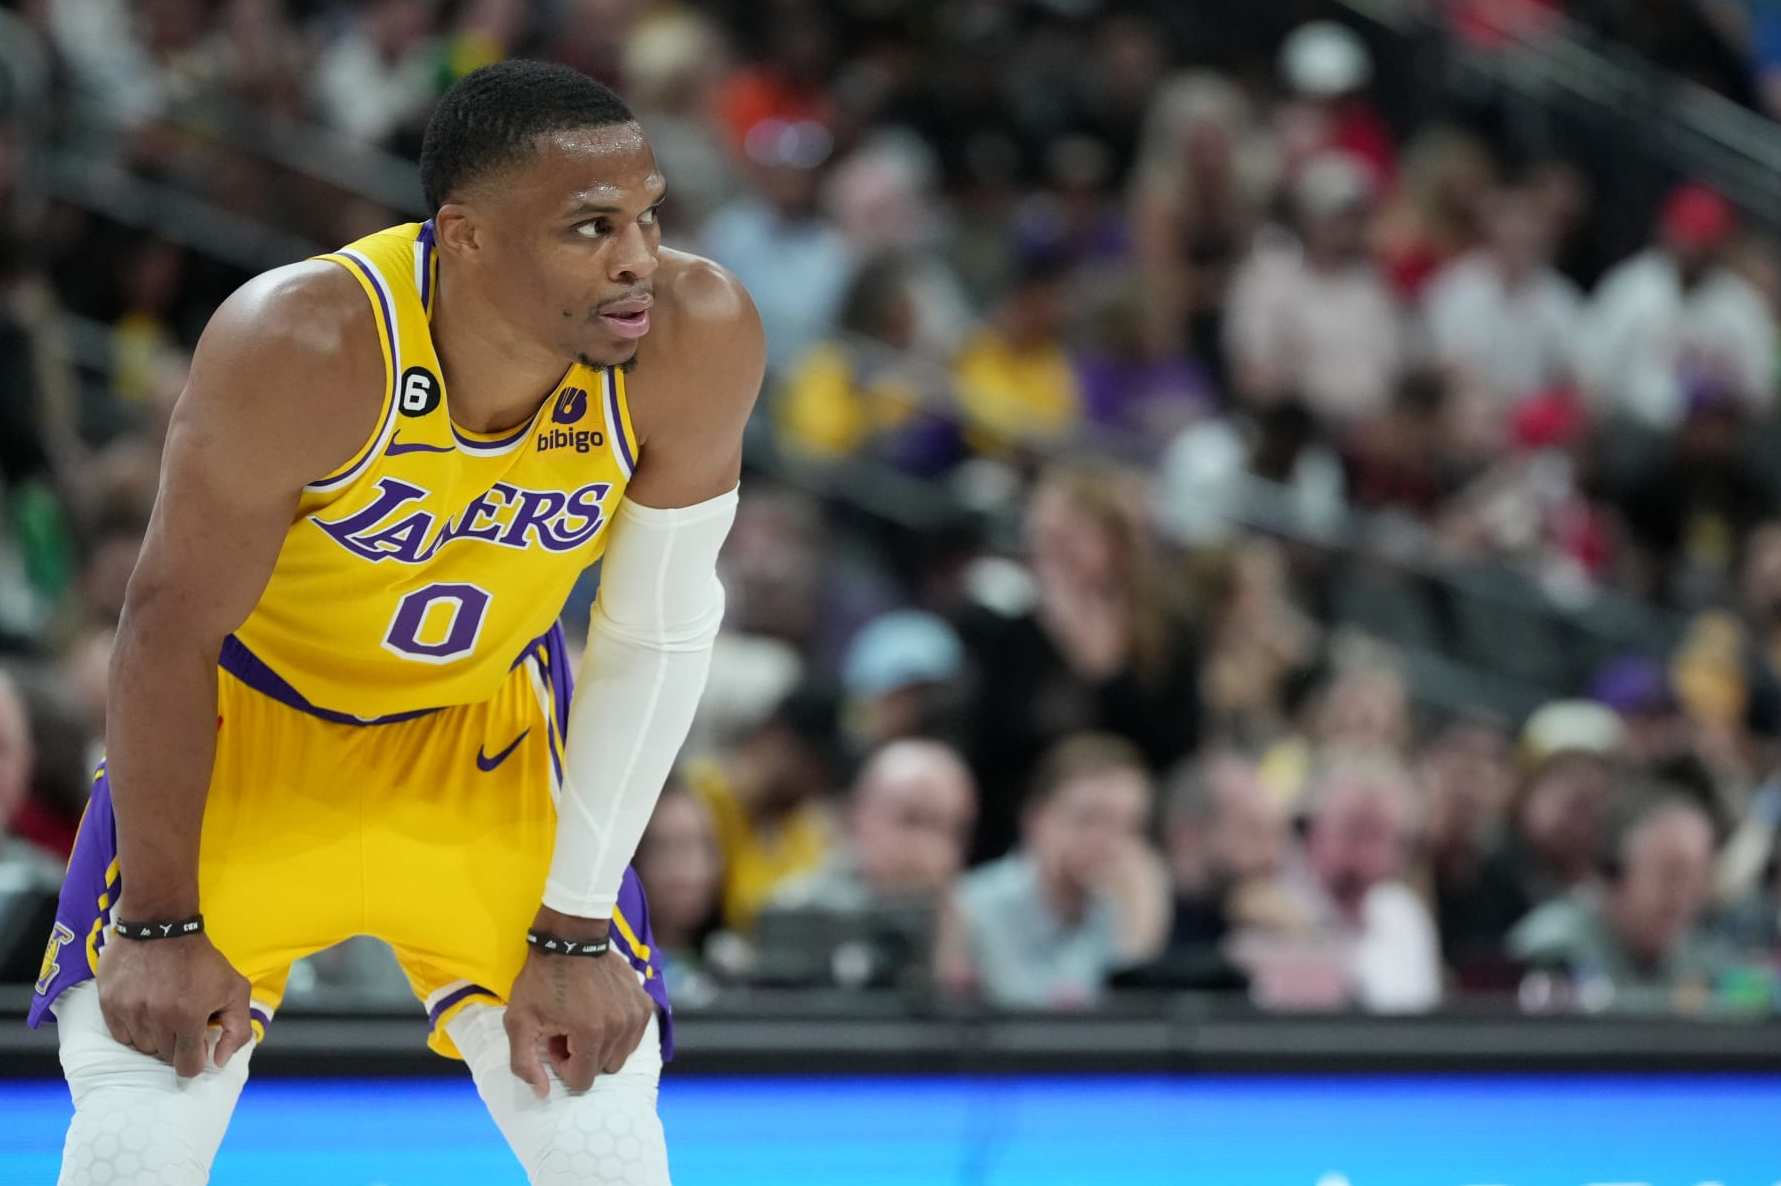 The Russell Westbrook bench experiment is working for the Lakers 